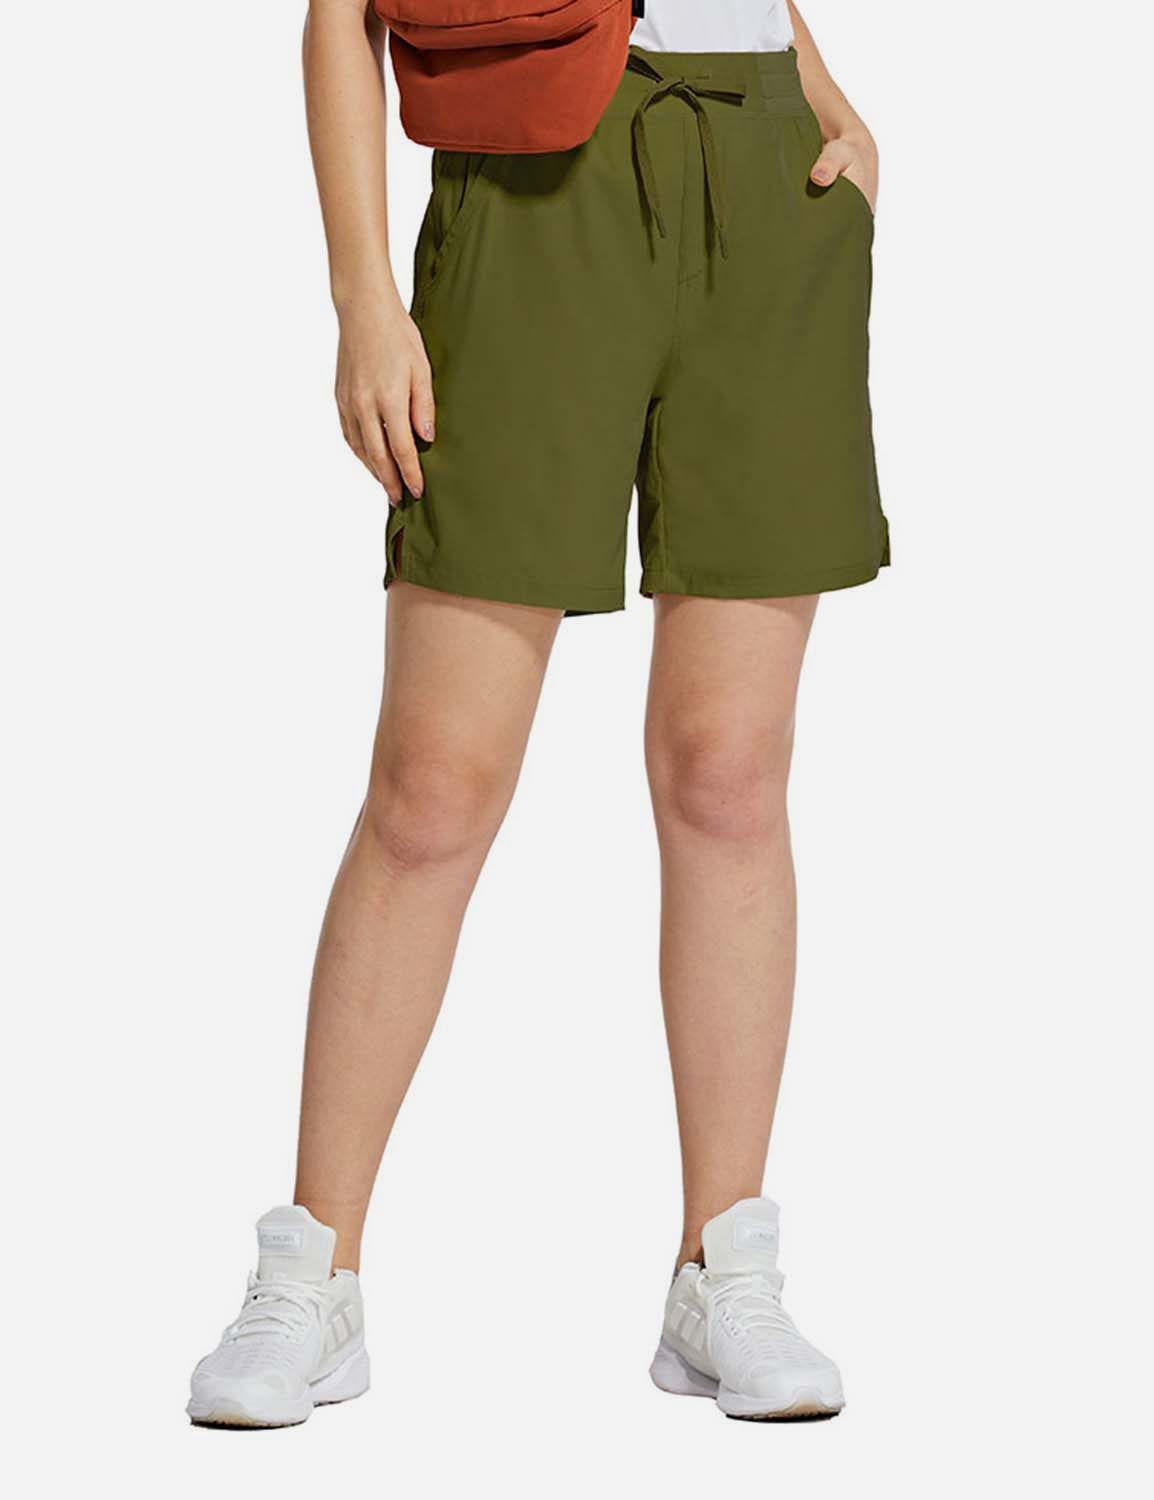 Baleaf Womens UPF50+ 7'' Hiking Stretchy Pocketed Shorts cga006 Olive Branch Front